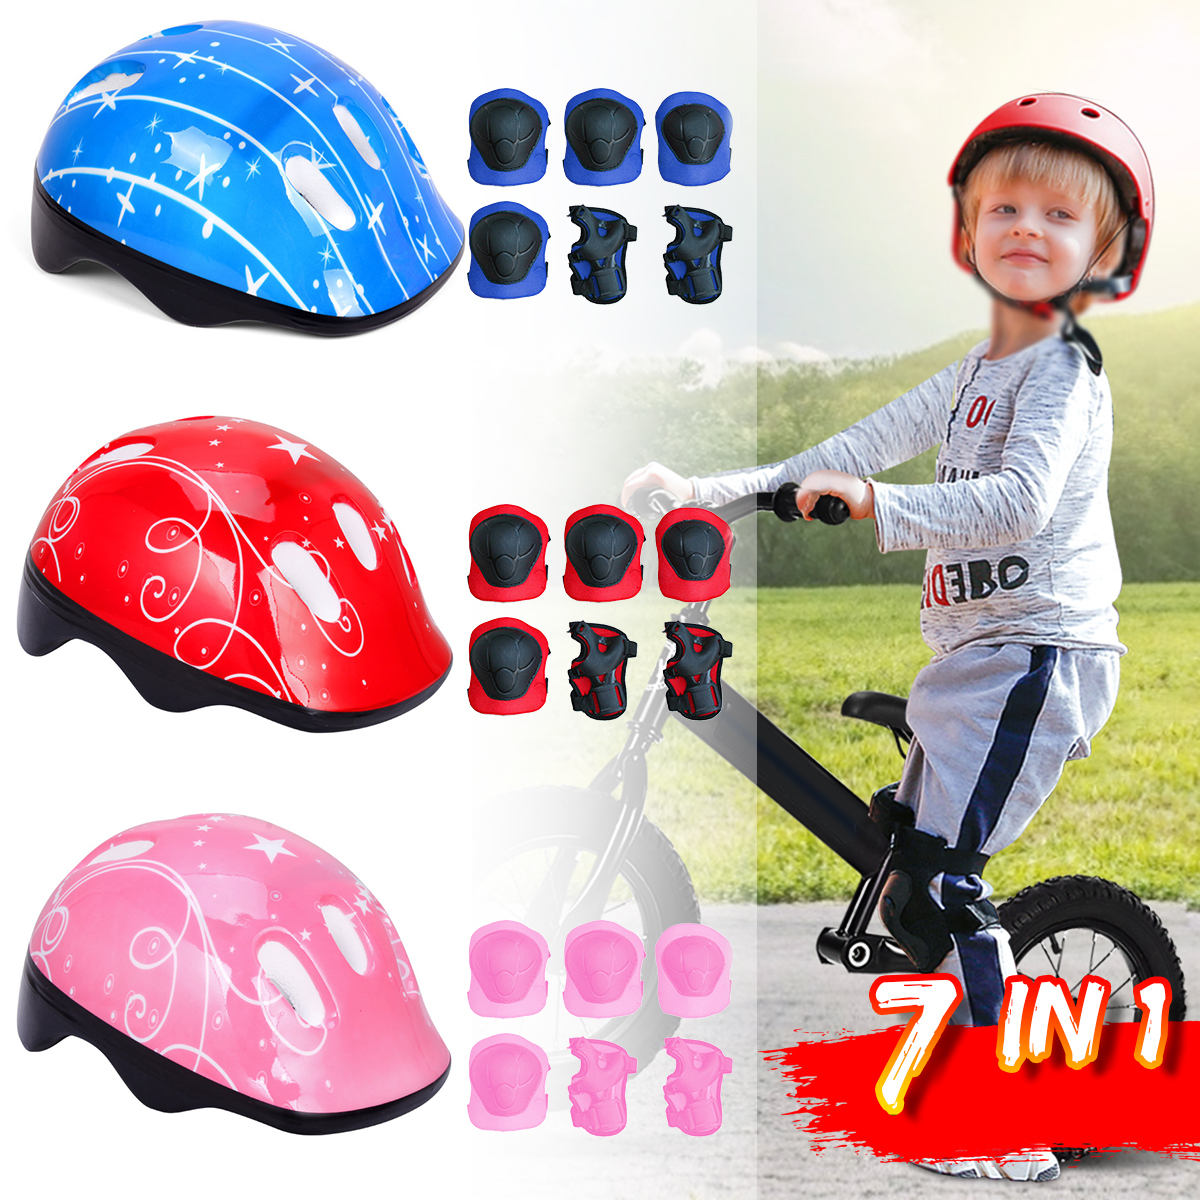 7-IN-1-Kidss-Balance-Bike-Helmet-Kits-With-Protect-Knee-Wrist-Elbow-Pads-Roller-Skating-Protective-E-1734300-1